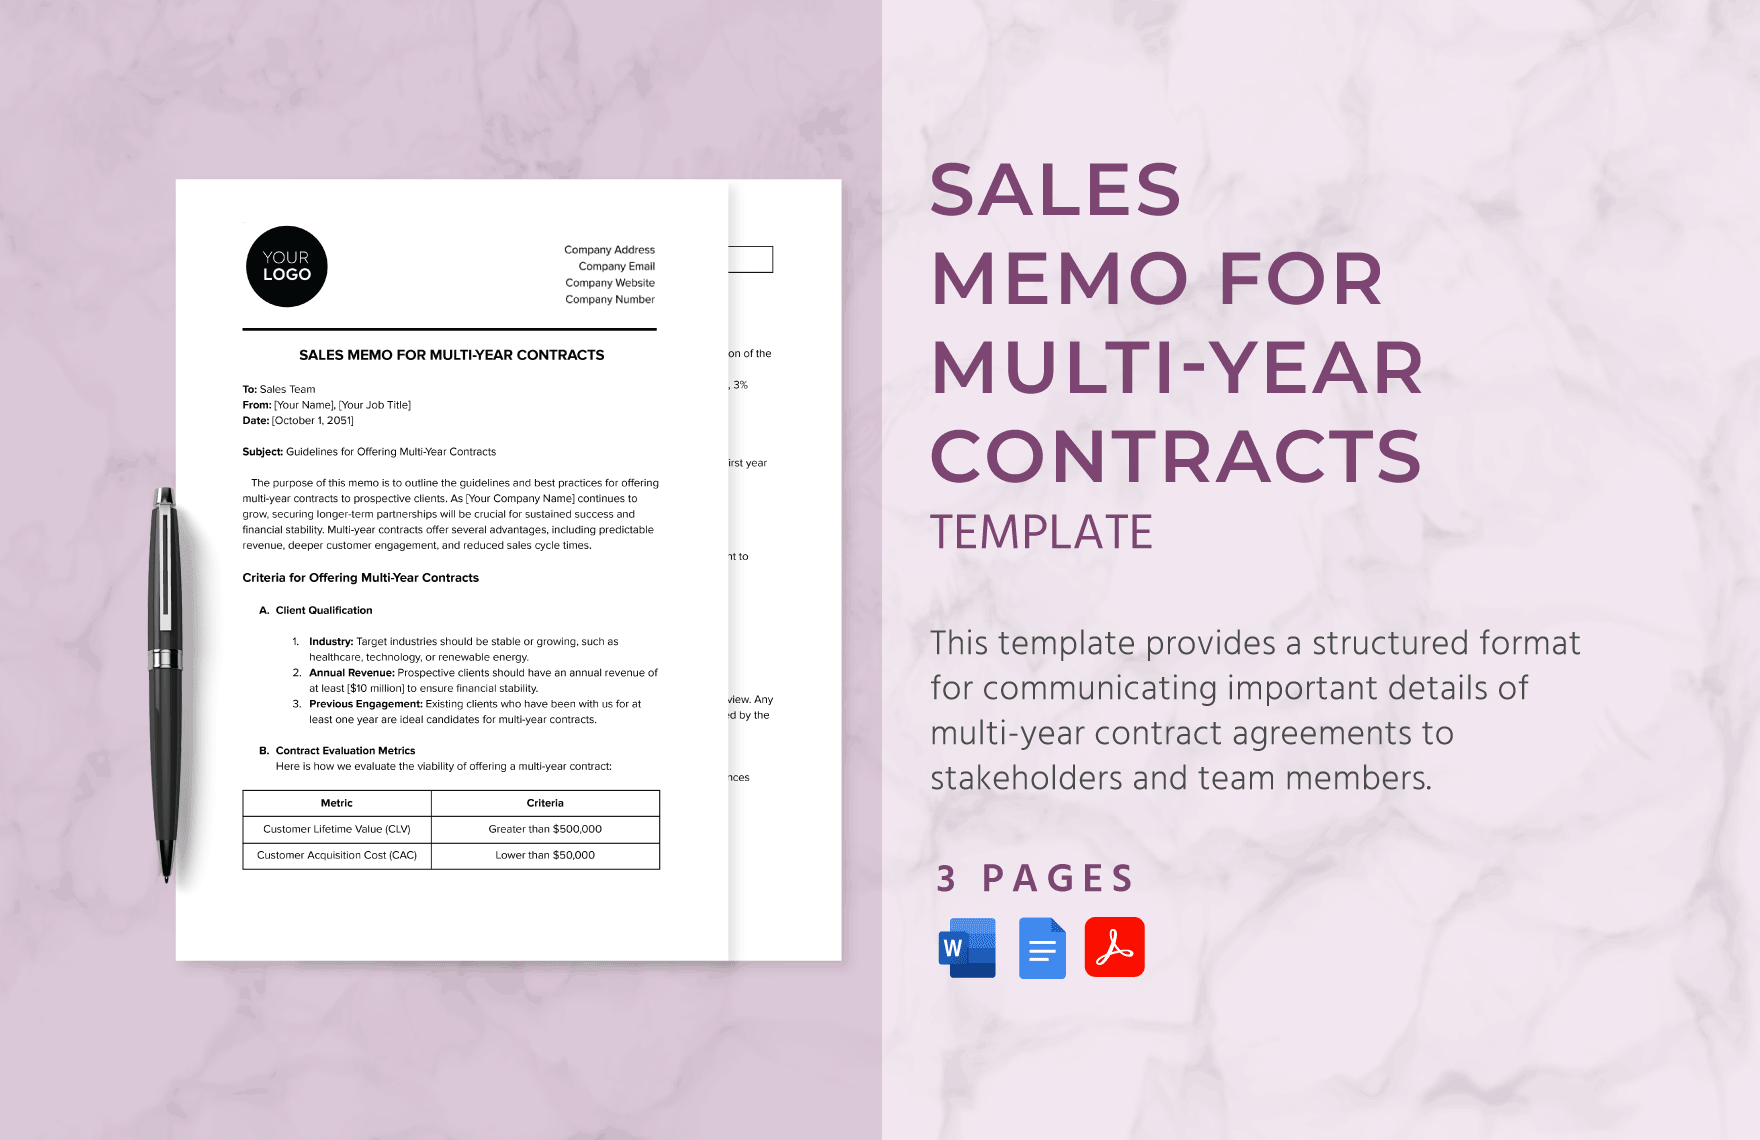 Sales Memo for Multi-Year Contracts Template